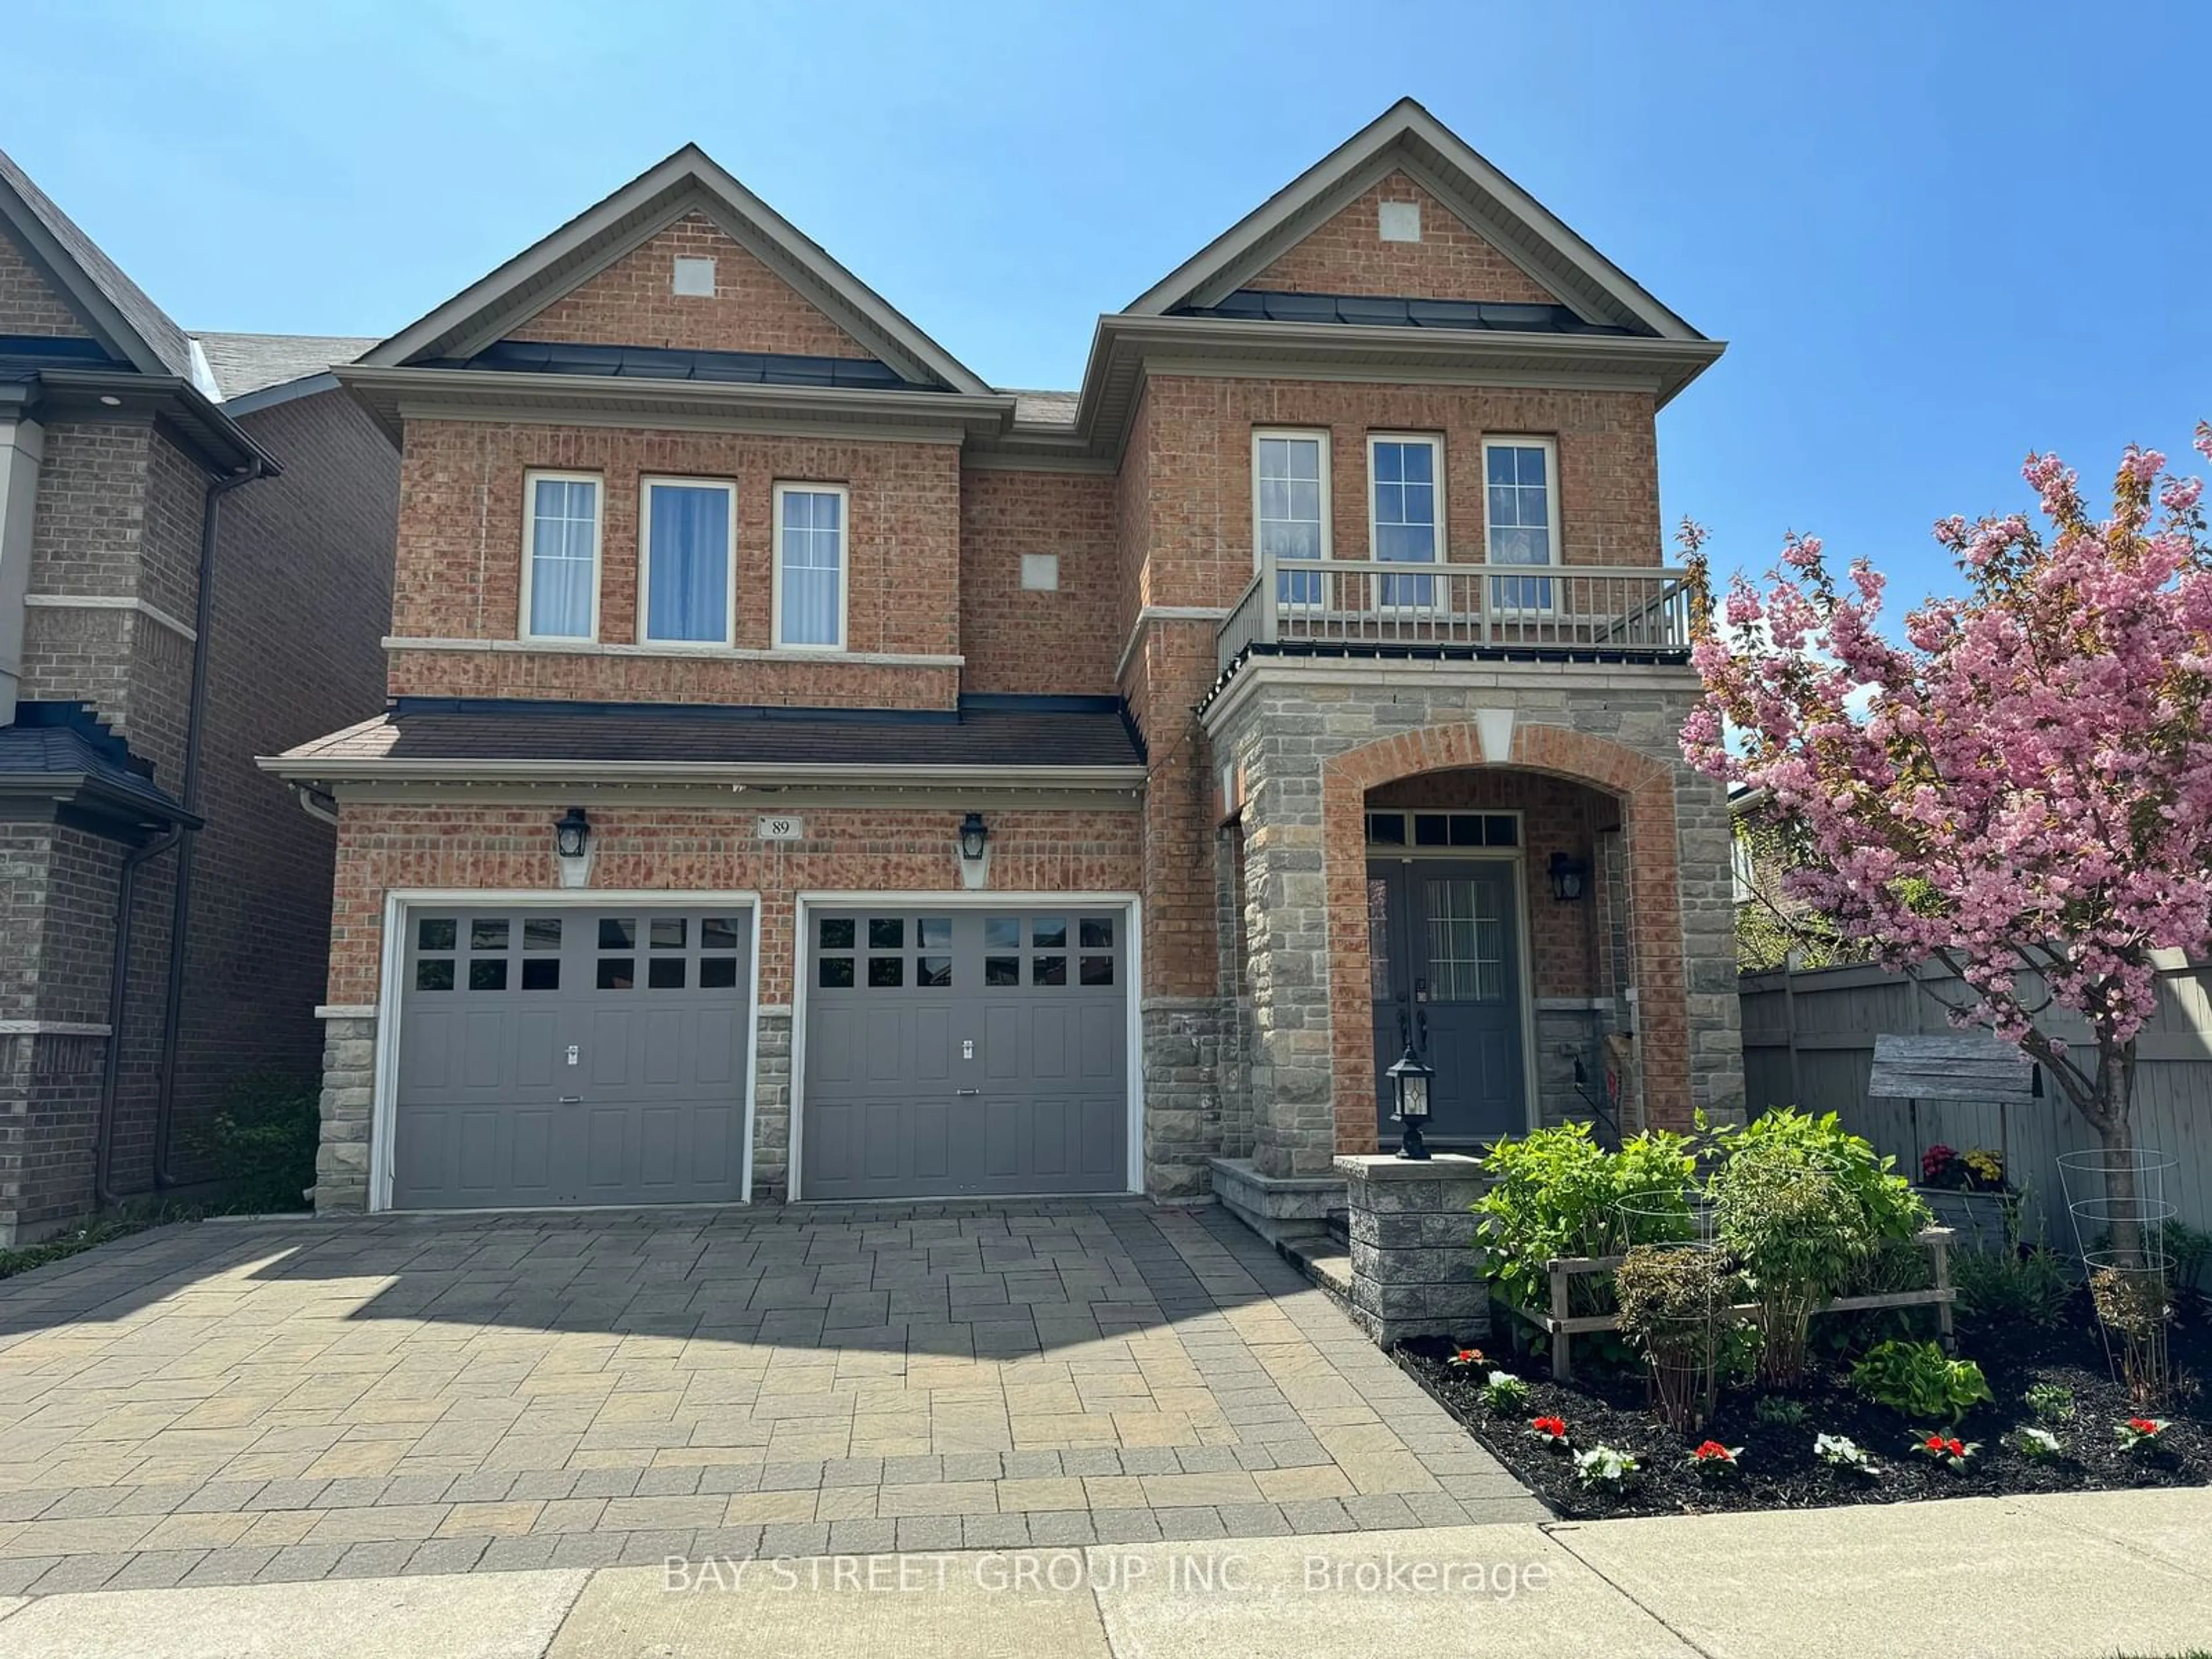 Home with brick exterior material for 89 Beckett Ave, Markham Ontario L6C 0R9